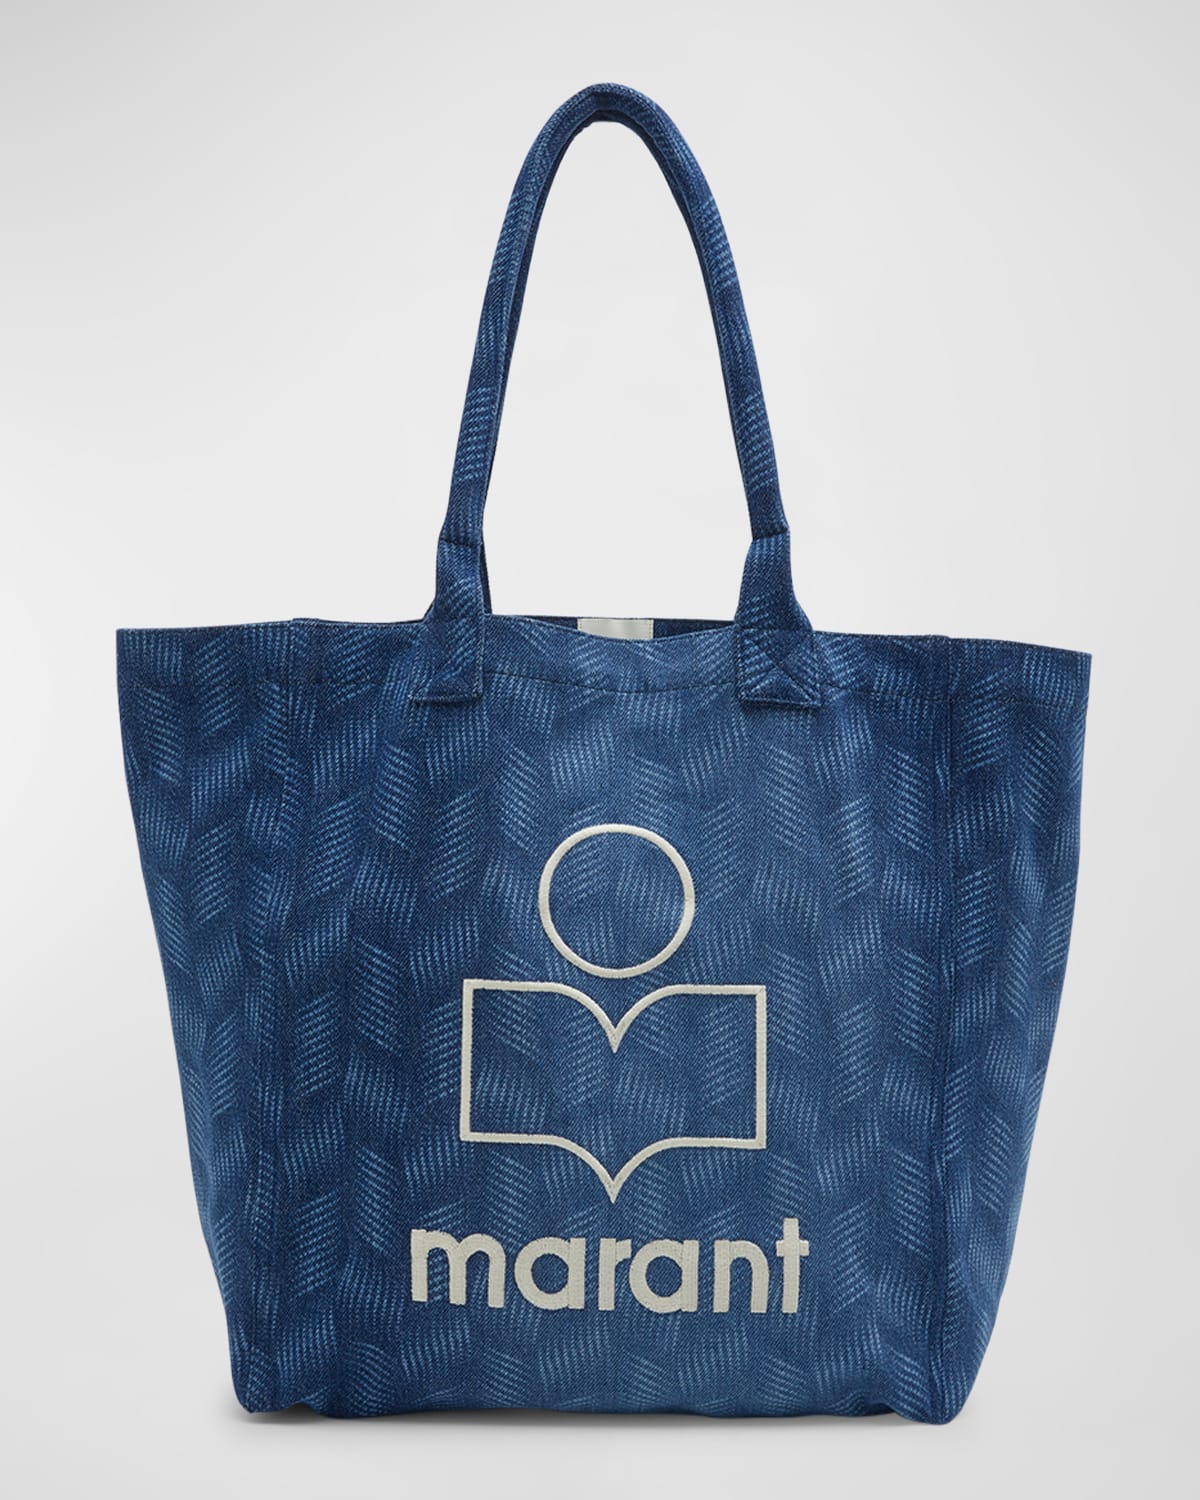 Isabel Marant Yenky Washed Canvas Tote Bag | Neiman Marcus